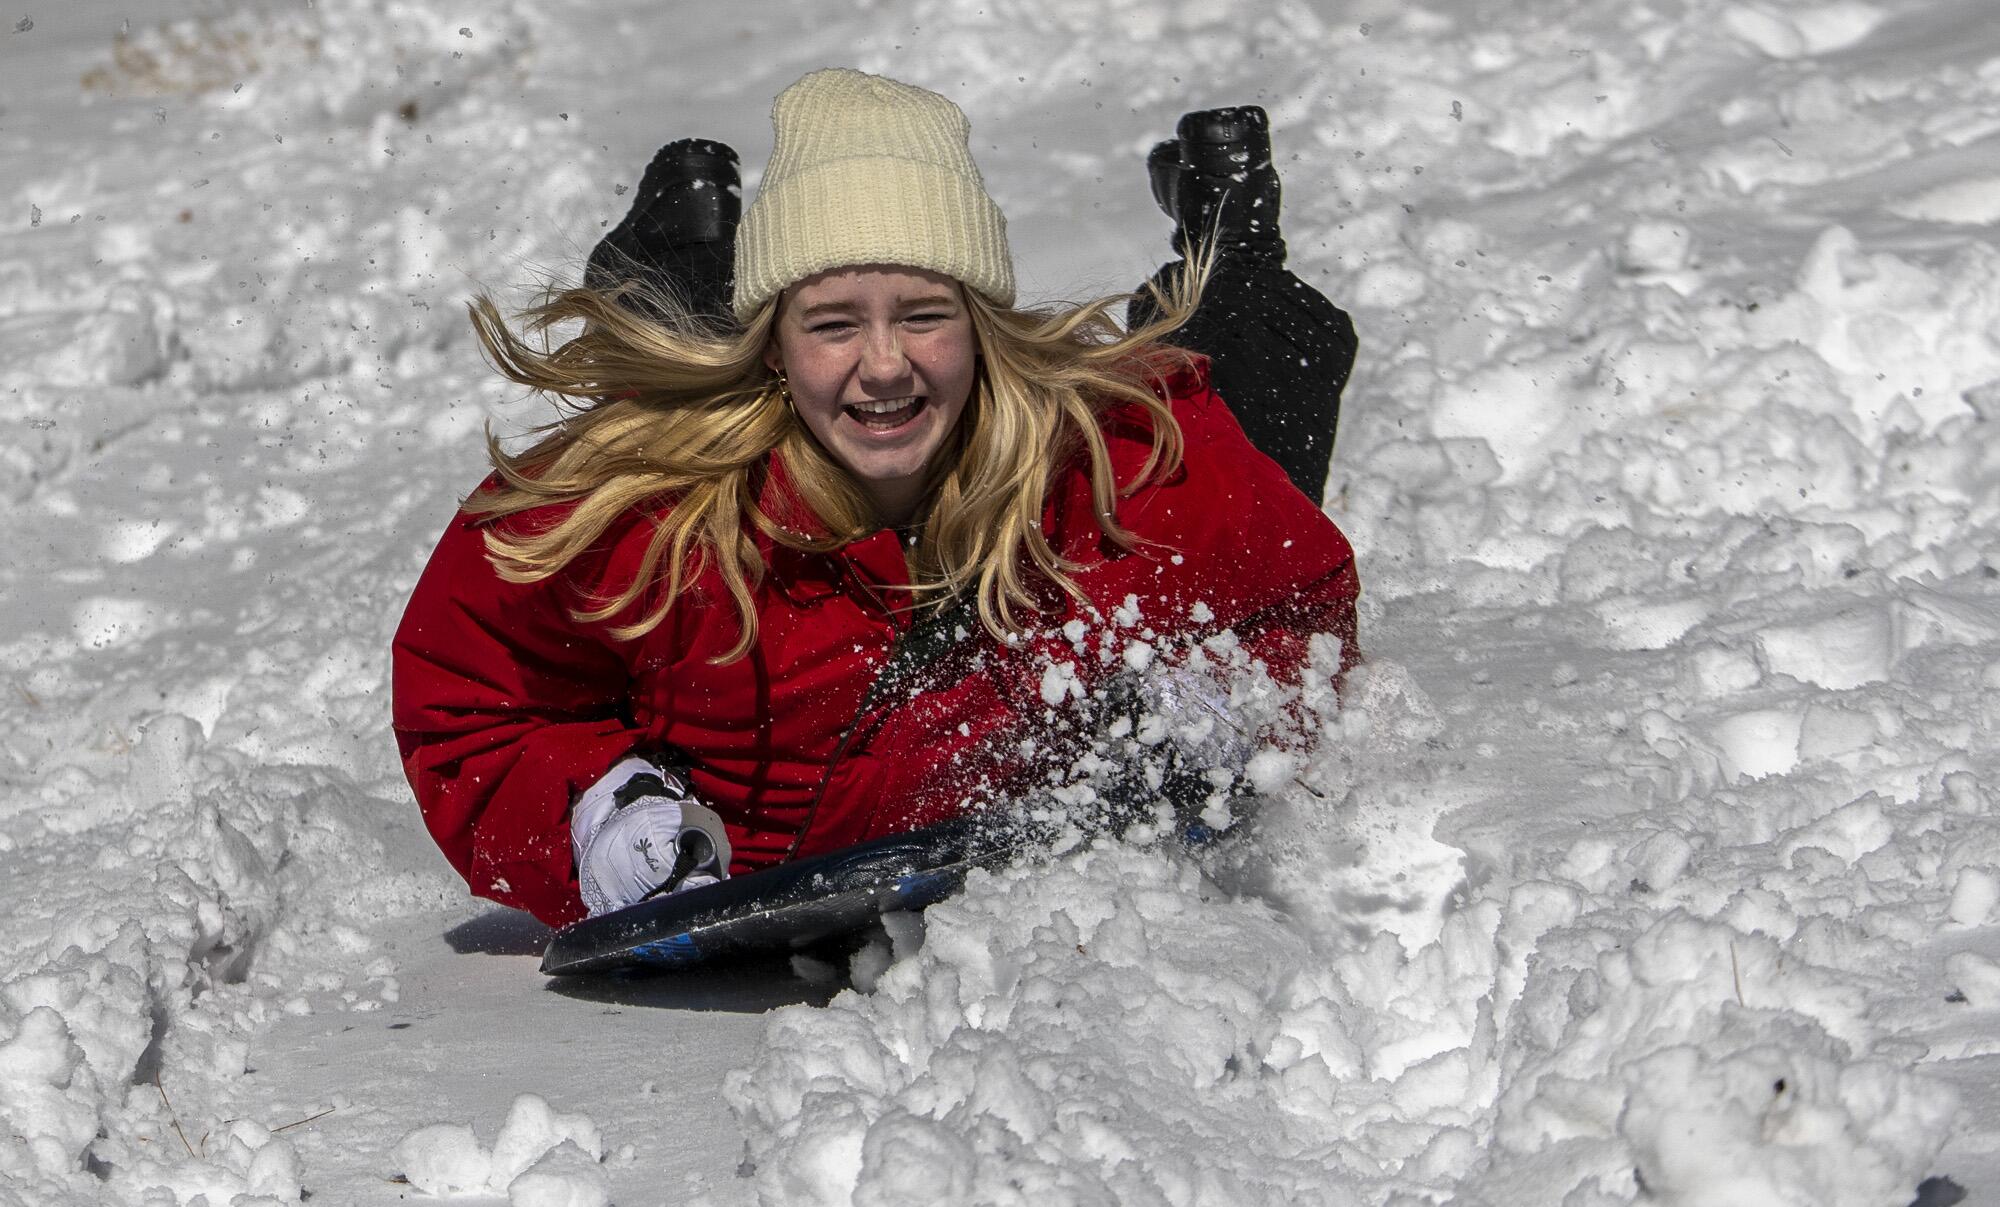 Tina Lewis, 19, of Fullerton sleds with friends in some fresh snow in the San Bernardino Mountains.